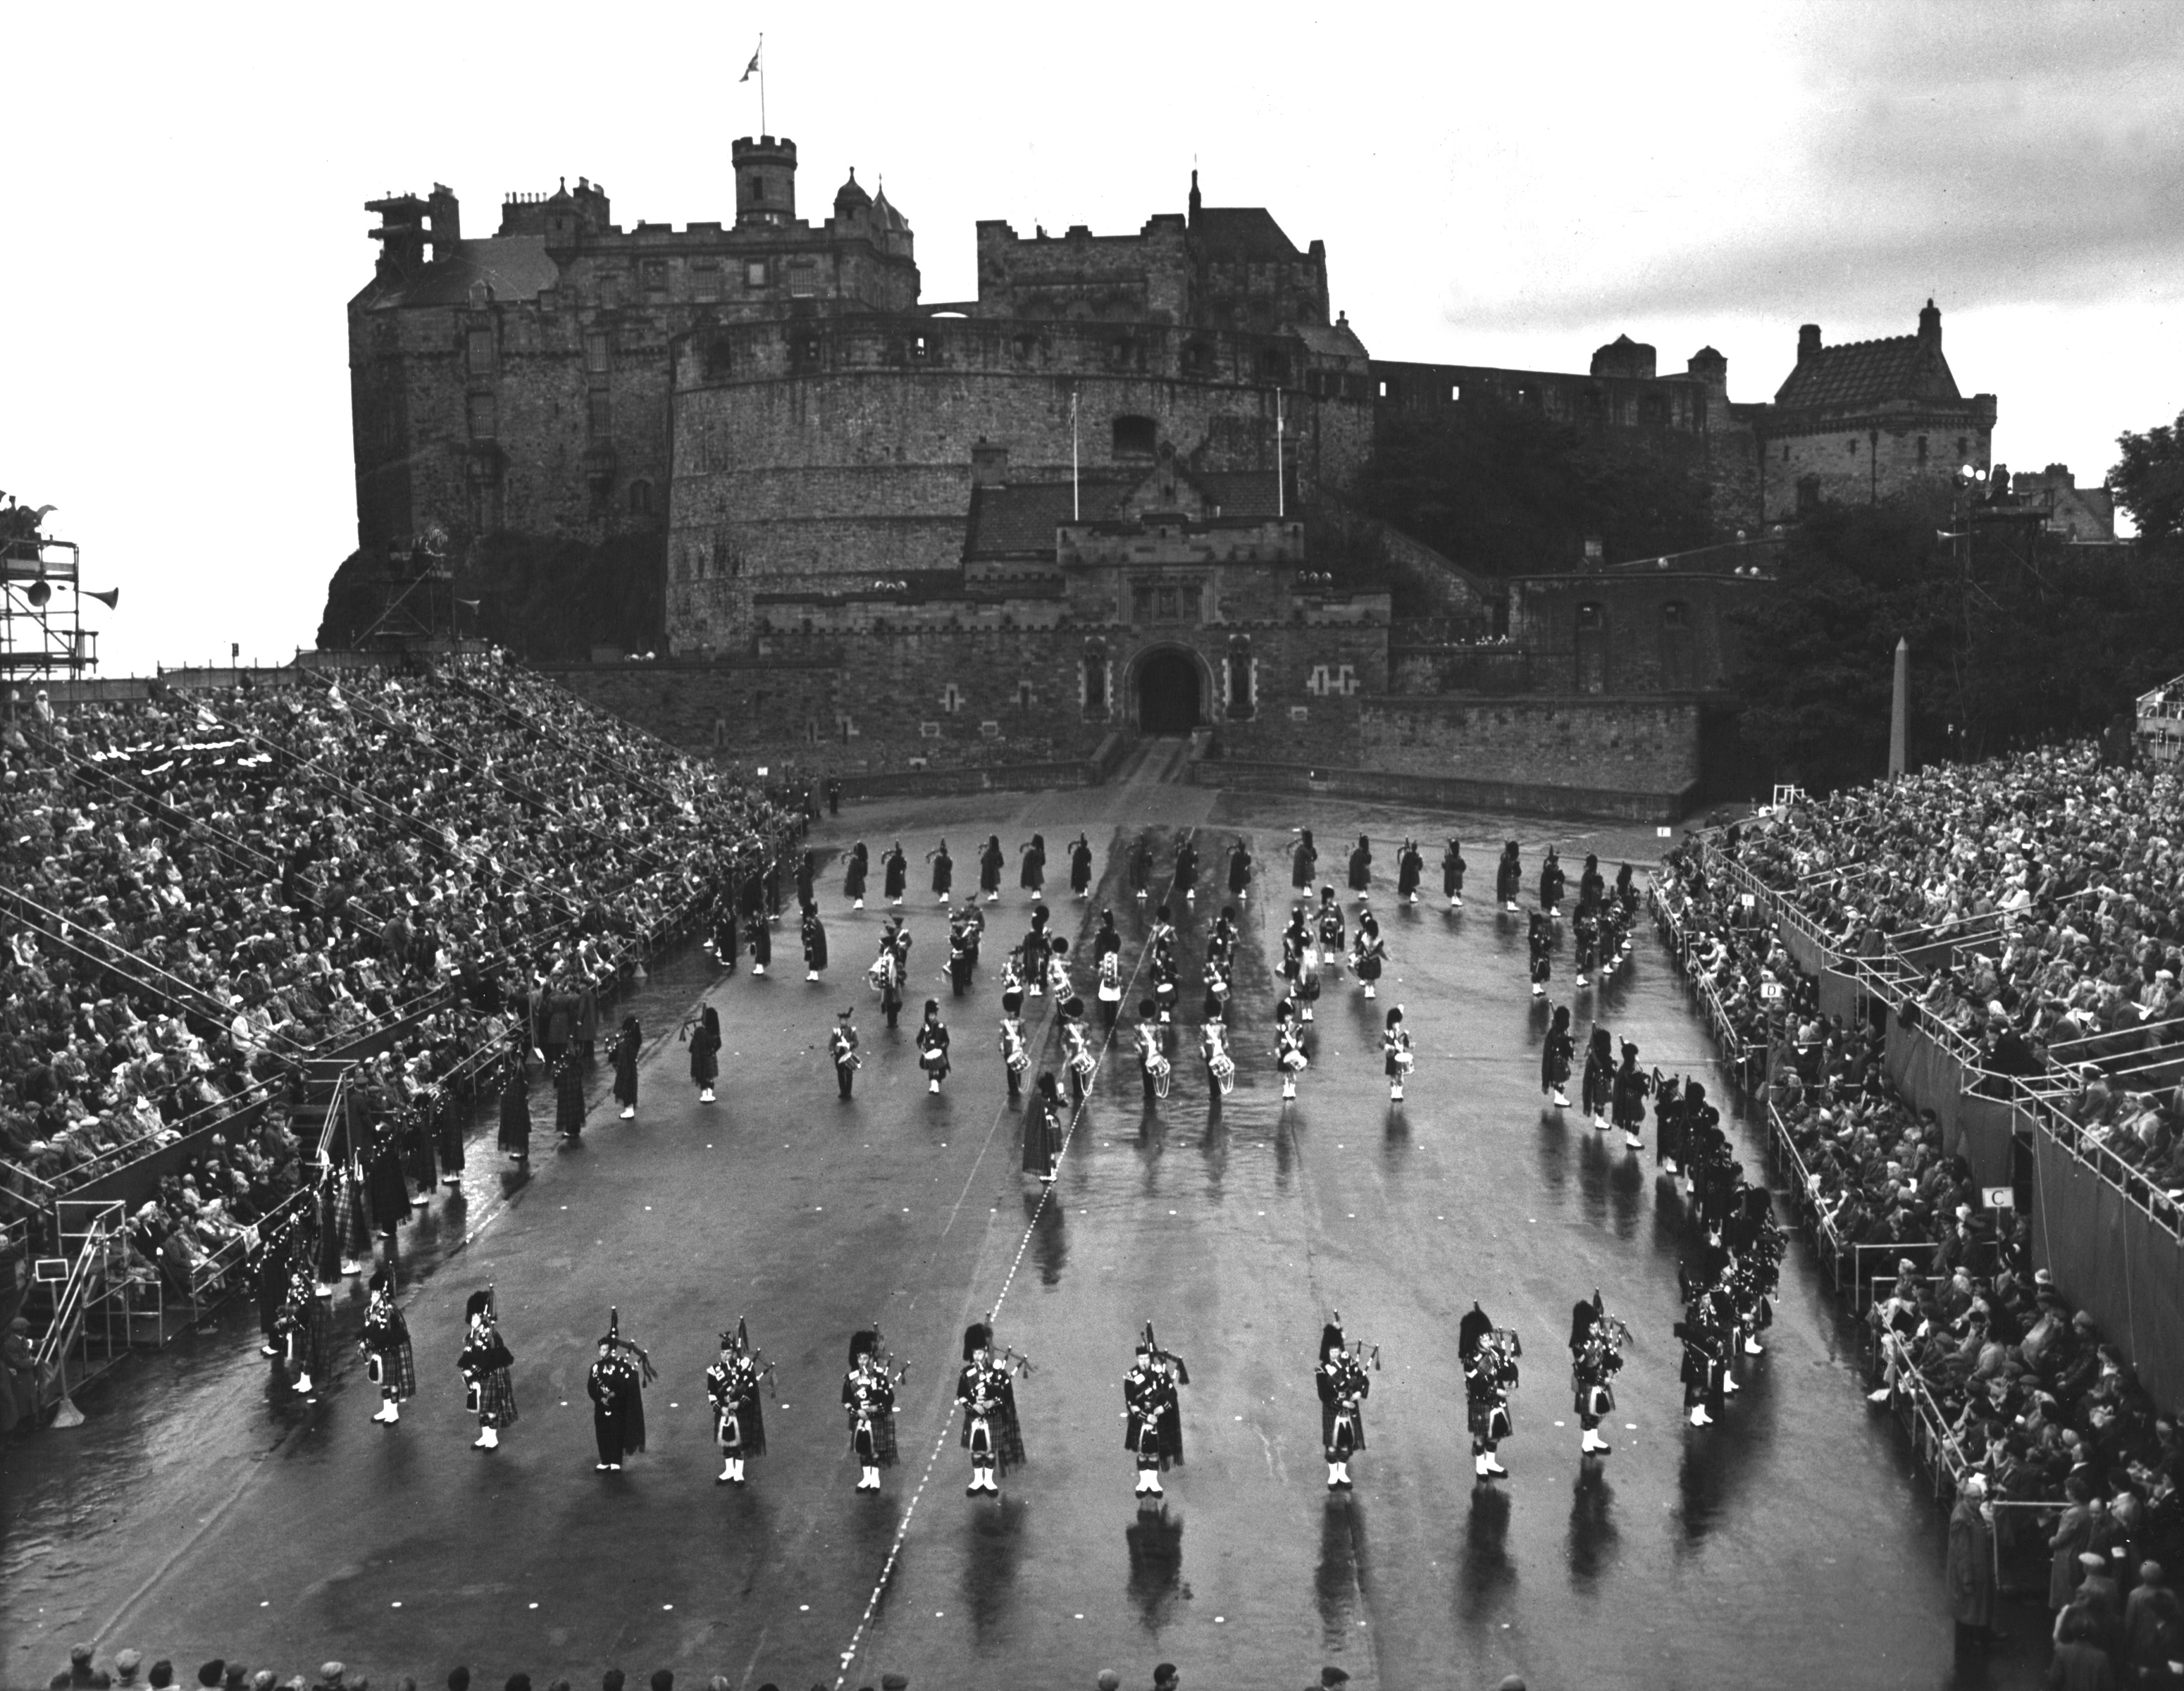  black and white archive photo showing a performance of the Edinburgh Military Tattoo. You can see the stands are very busy with spectators looking at a scene of the military parade against the backdrop of Edinburgh Castle.